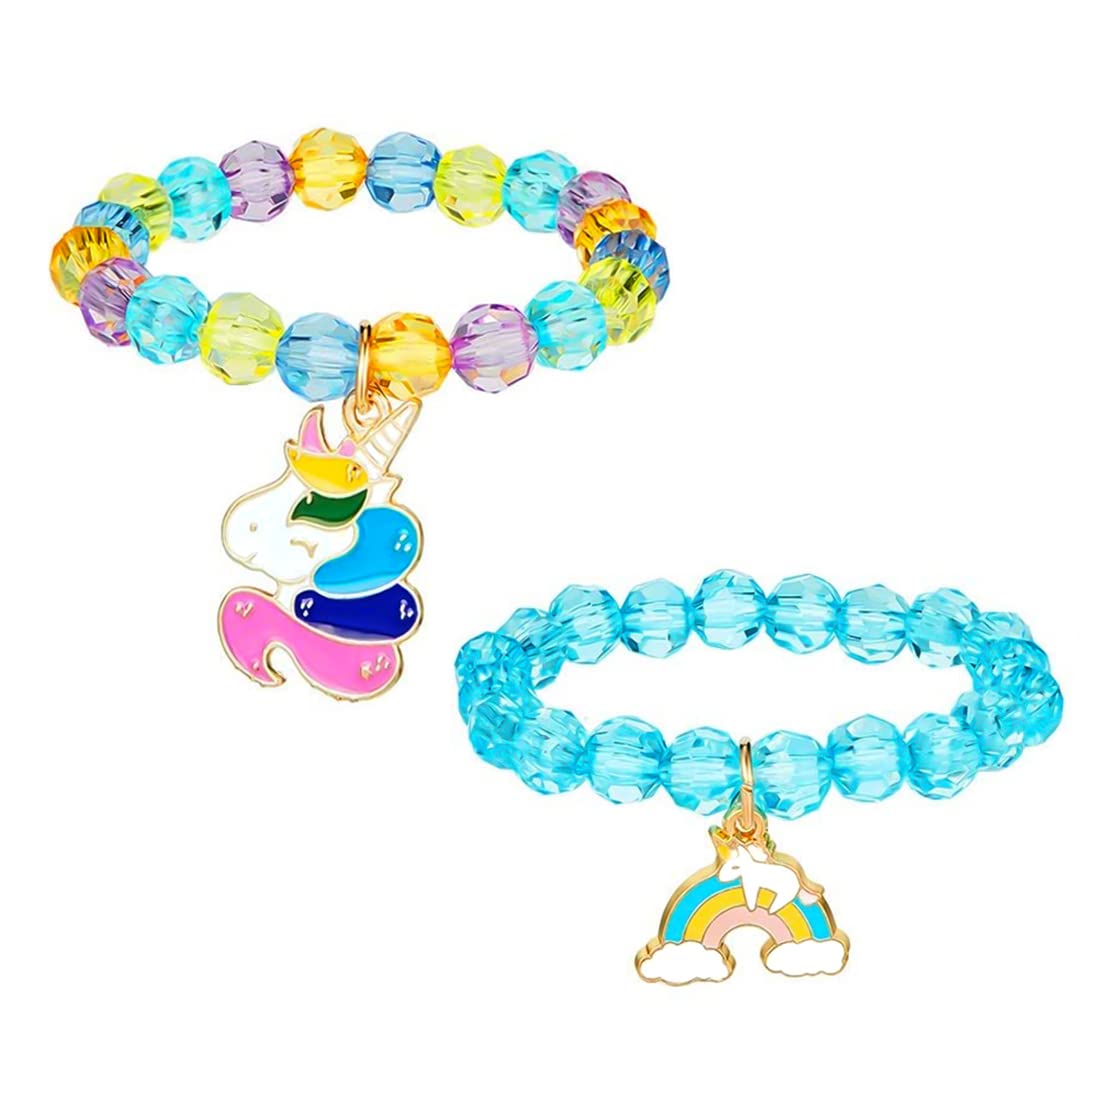 Melbees by Yellow Chimes Bracelet for Girls Kids Charm Bracelets for Girls | Combo of 2 Pcs Candy Colors Unicorn Beads Bracelet For Girls kids | Birthday Gift For Kids and Girls